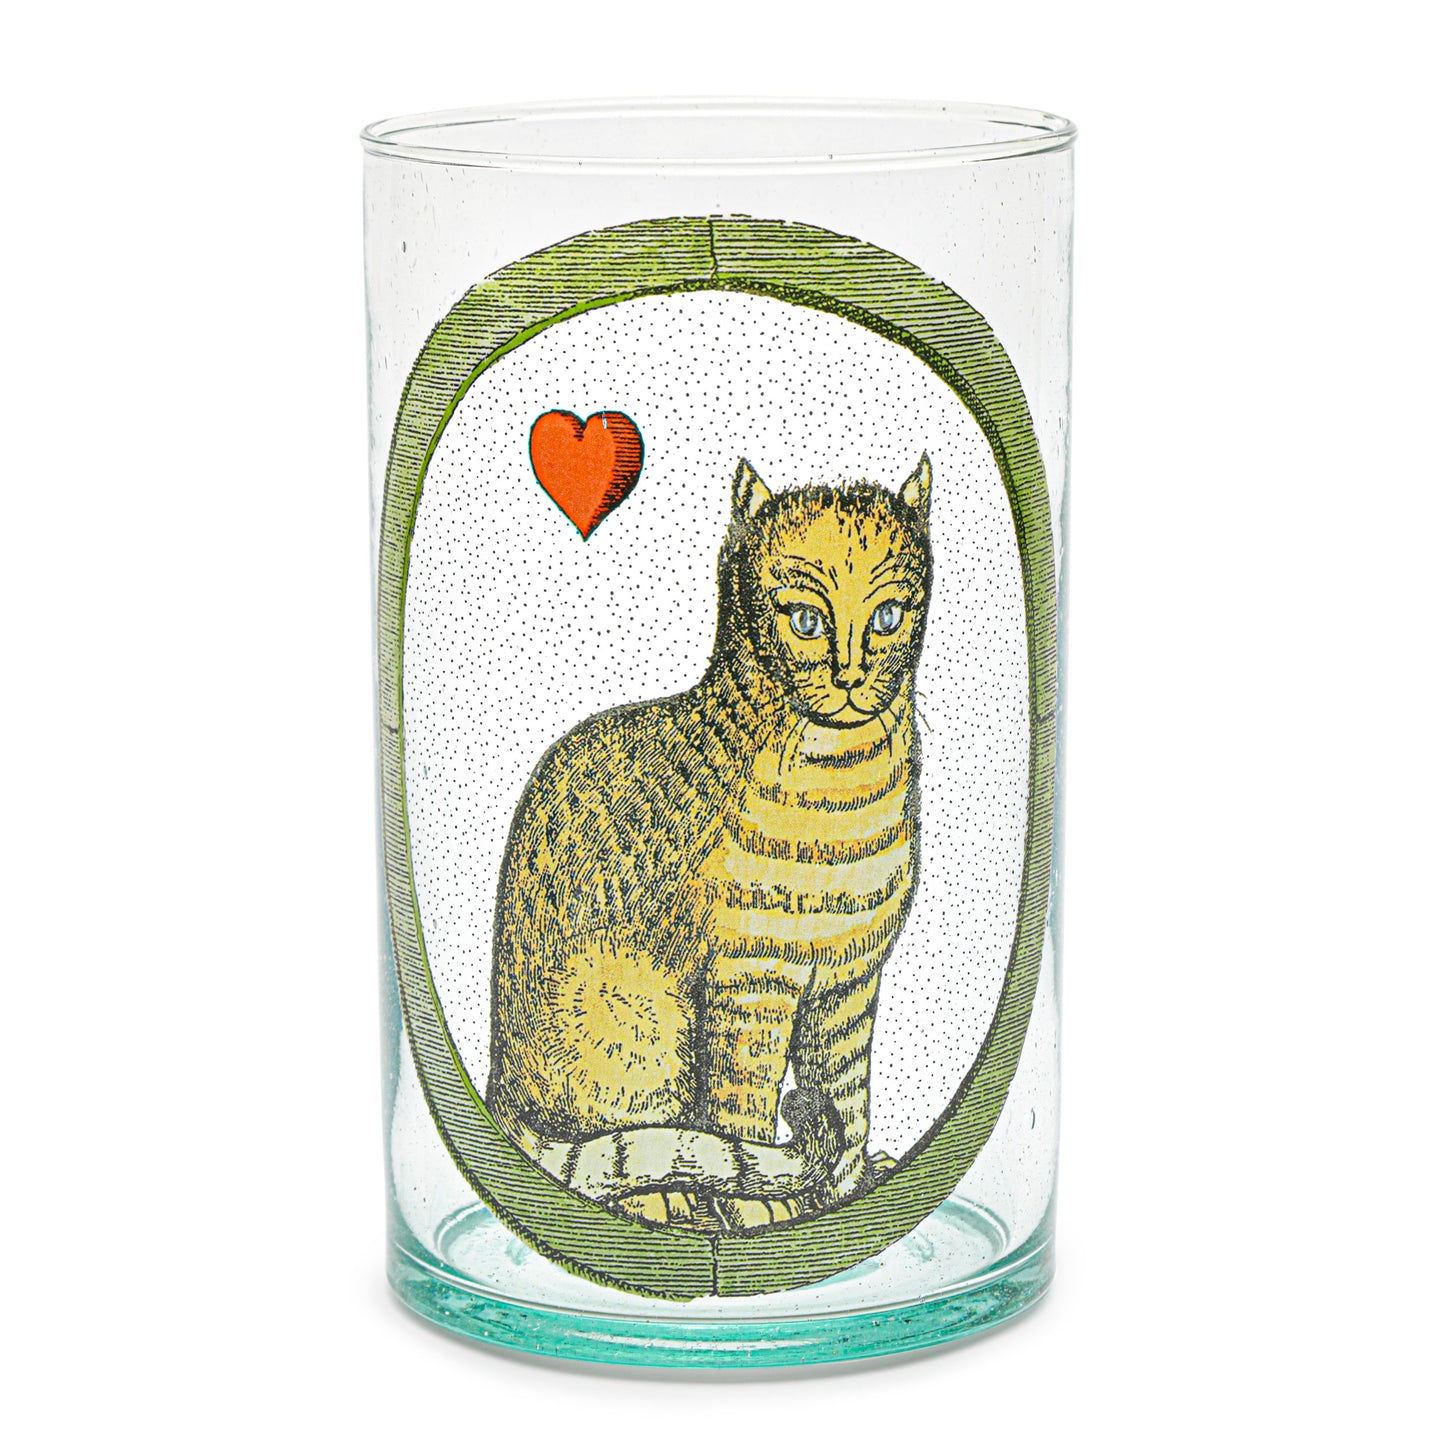 Illustrated vase | THE HEART CAT